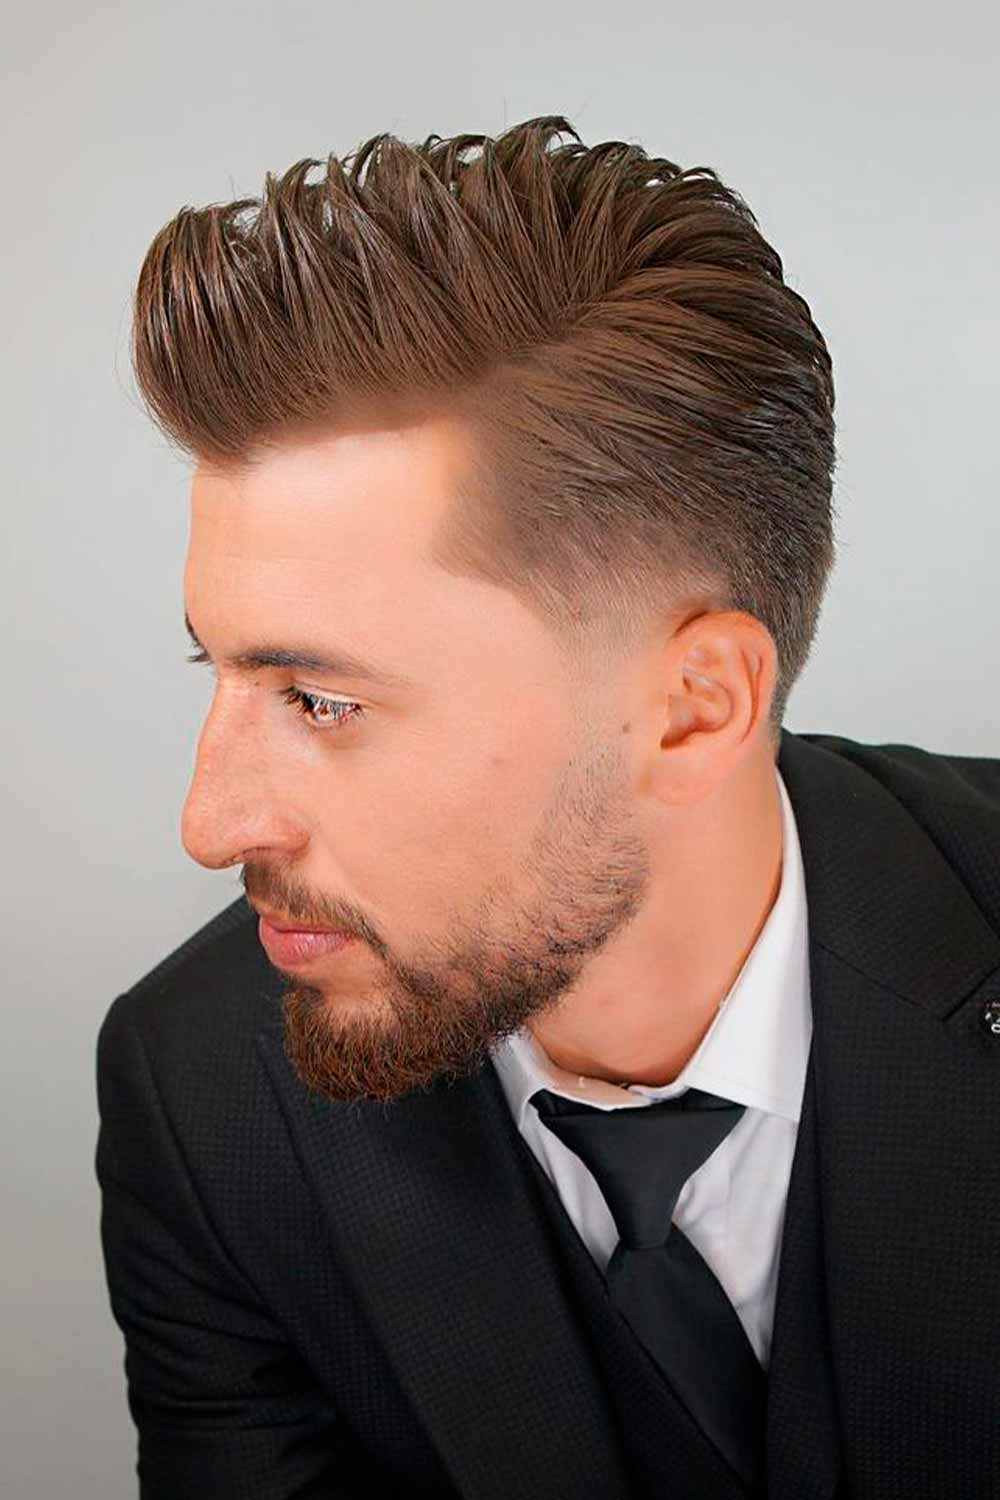 Classic Taper Haircut With Parting #taper #taperhaircut #taperedhair #taperedhaircut